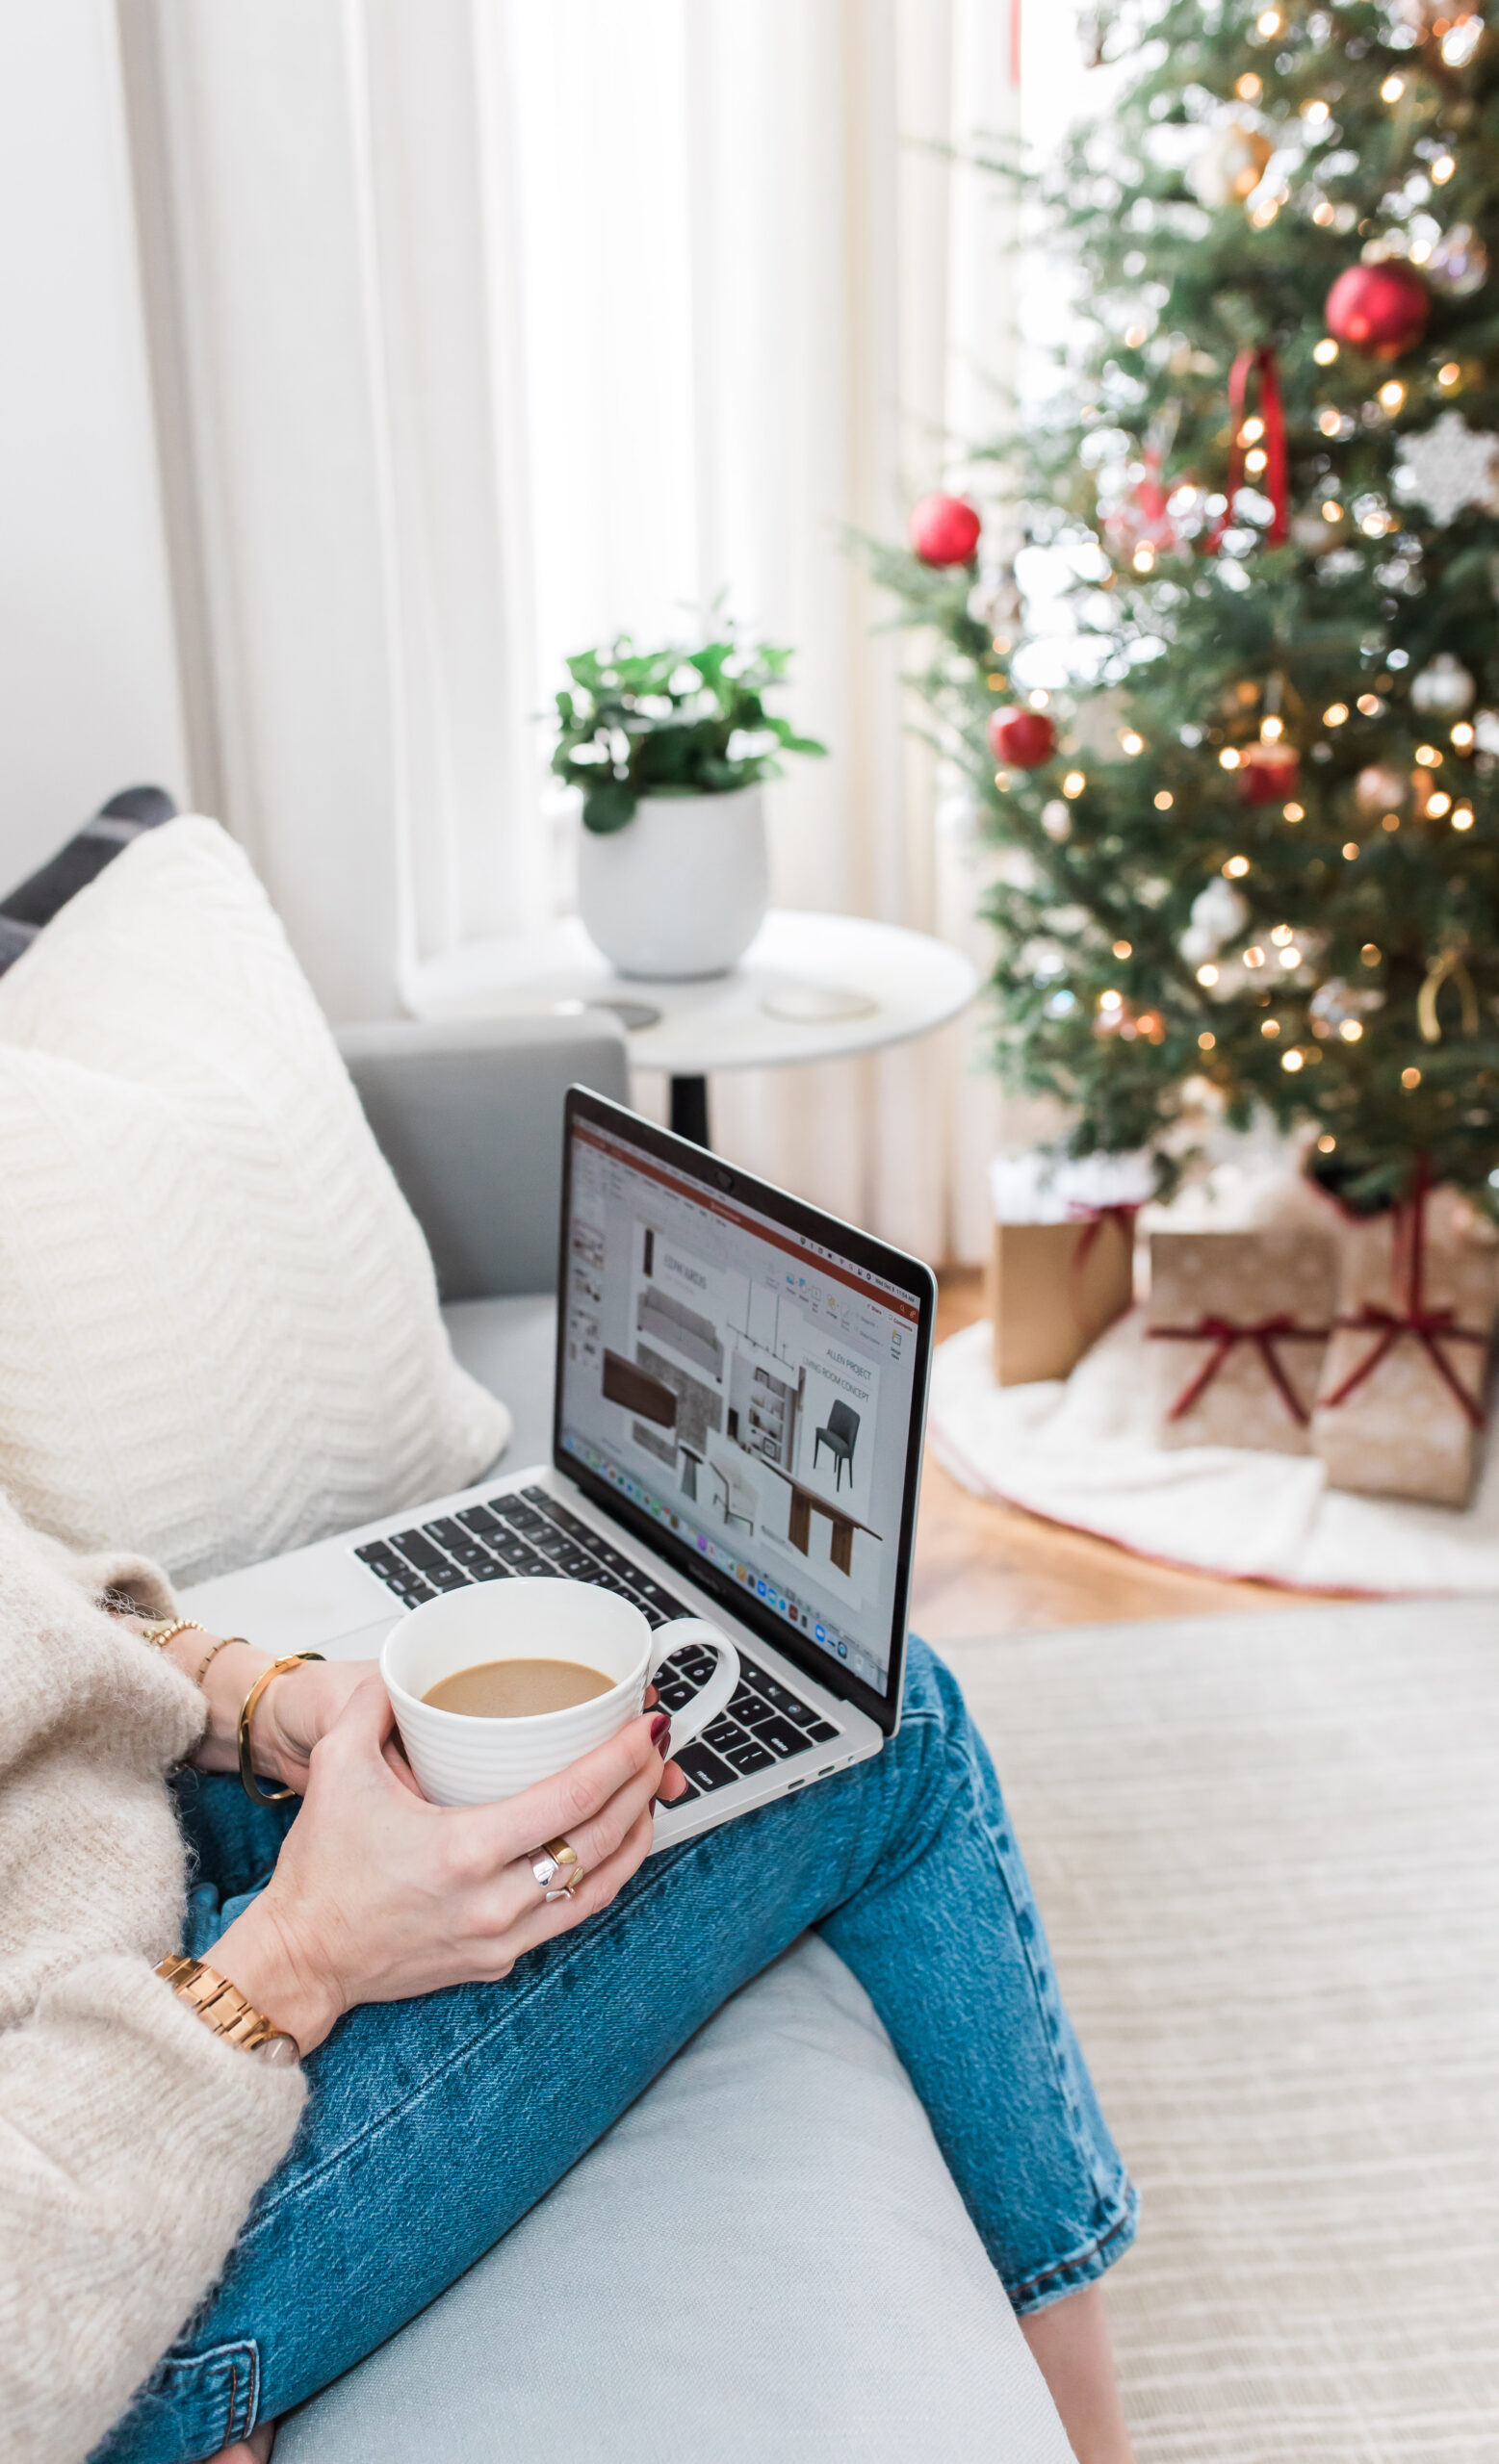 lady with laptop on her lap and coffee in hand with Christmas tree and gifts in the background